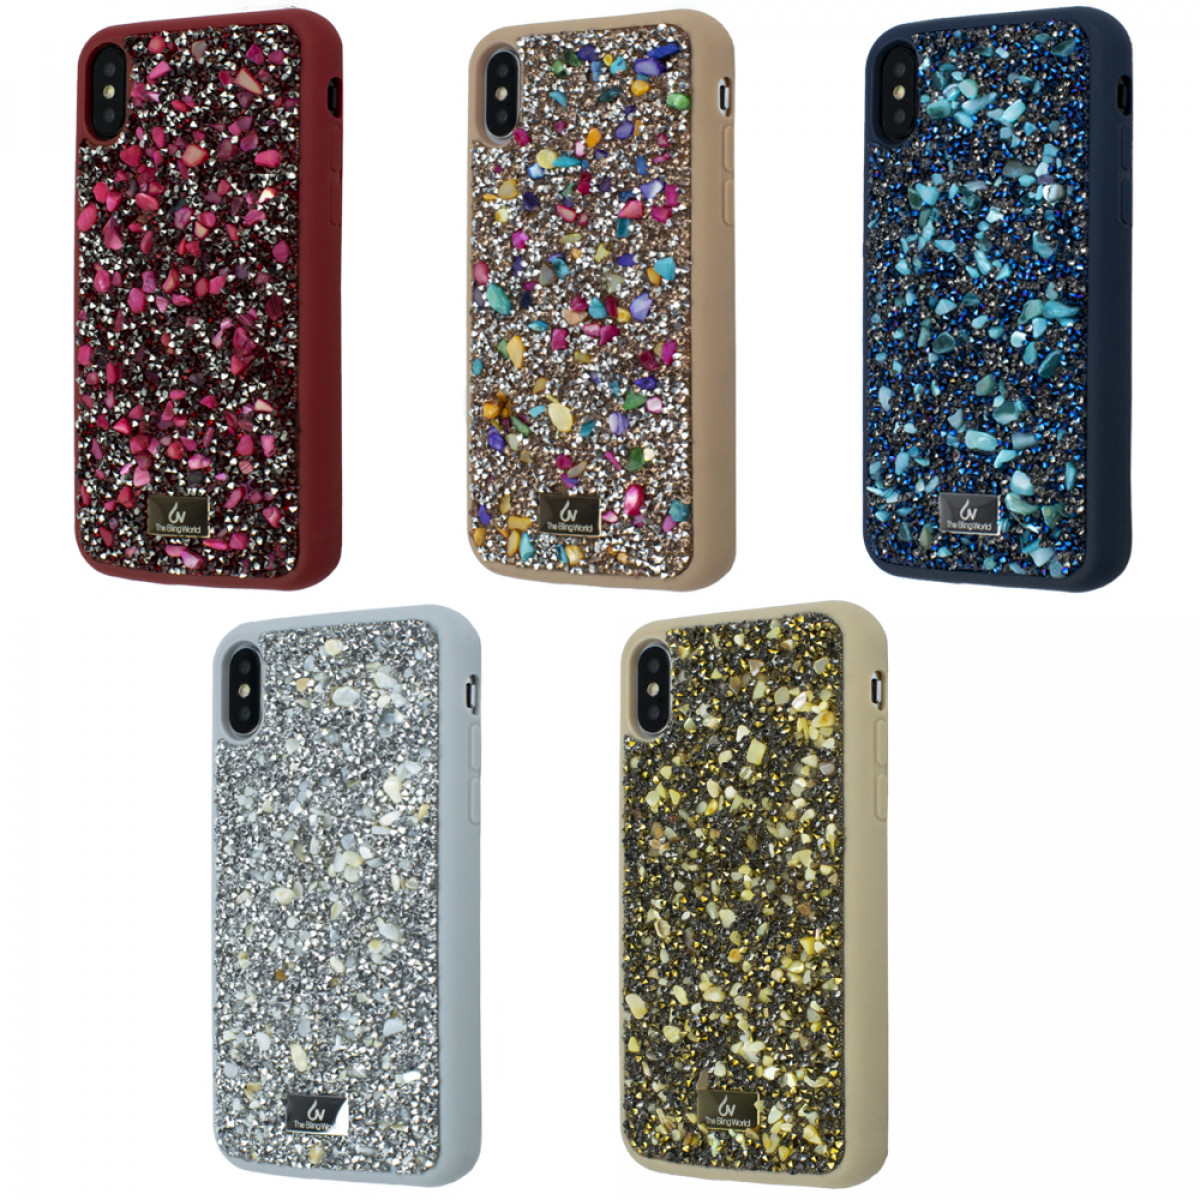 Bling STONE Case iPhone XS Max